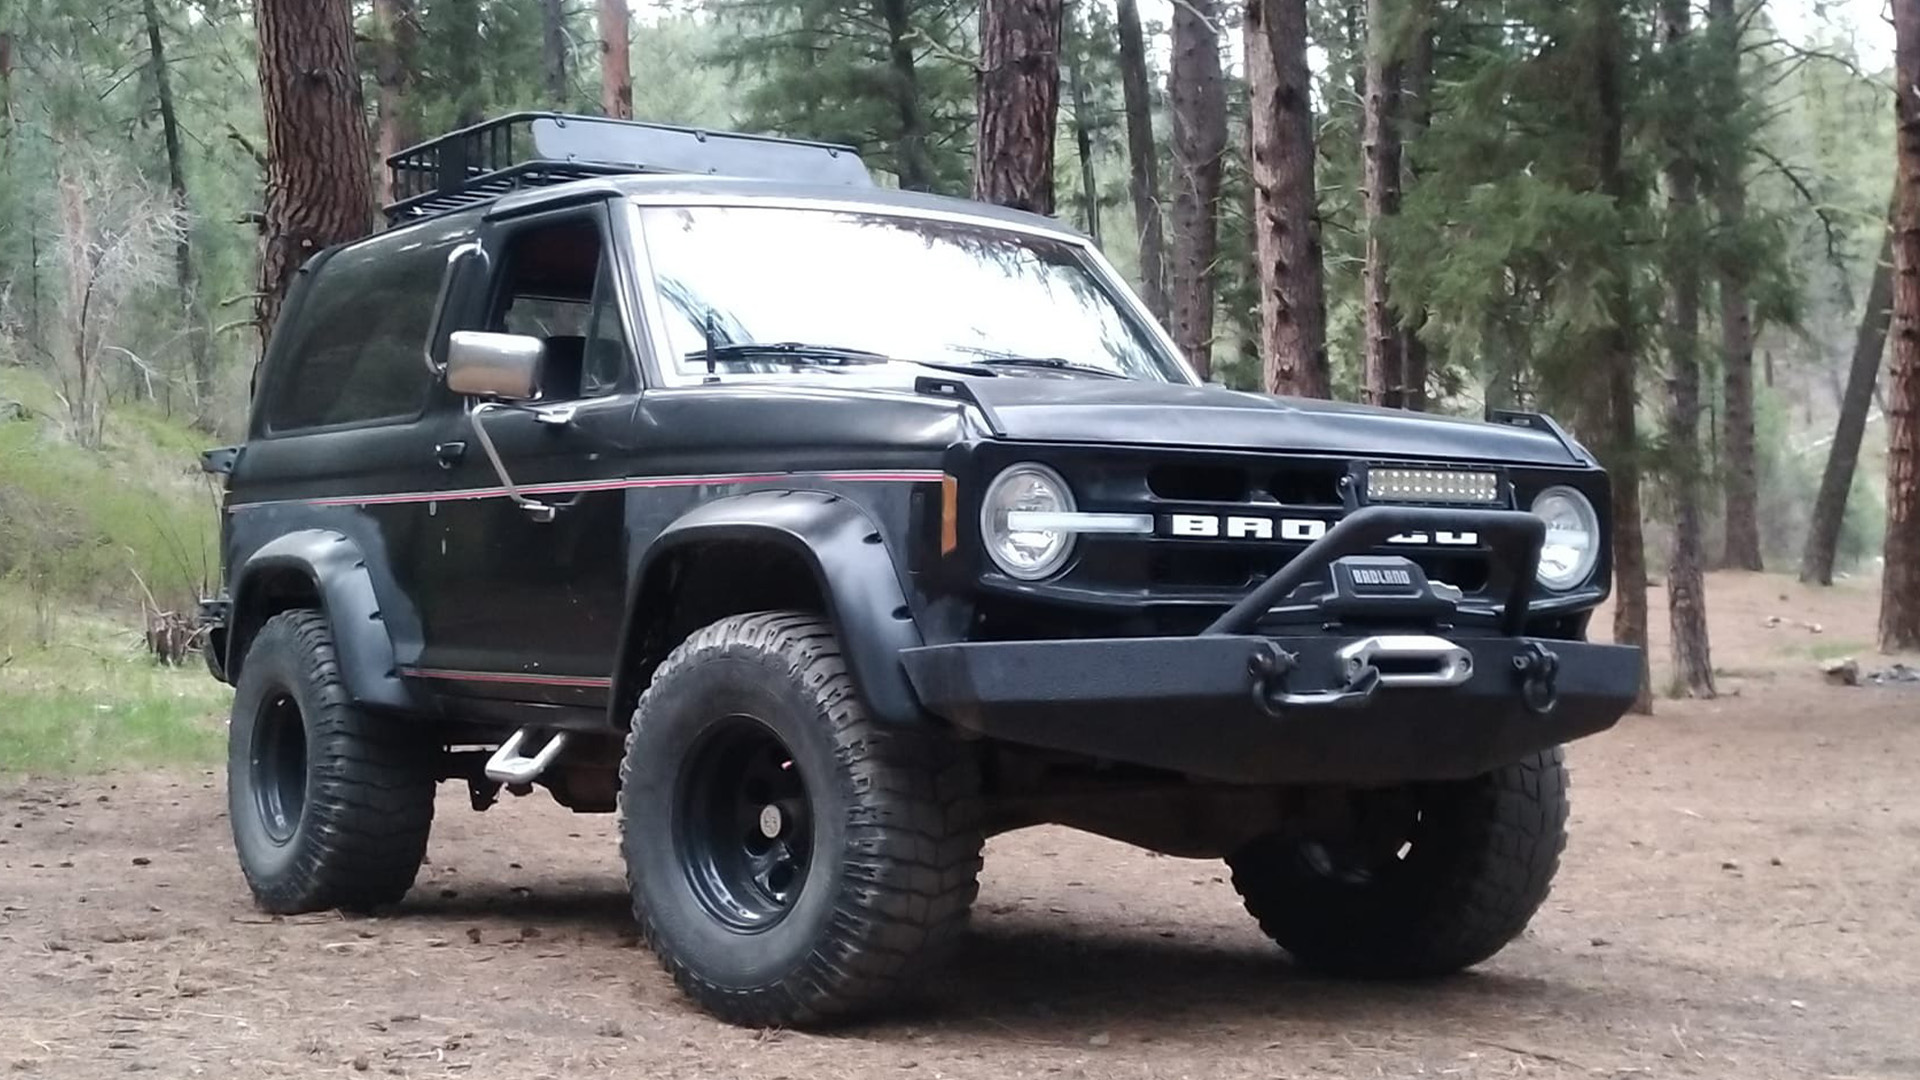 This $1,400 Kit Makes the Old Ford Bronco II Look Like a New One